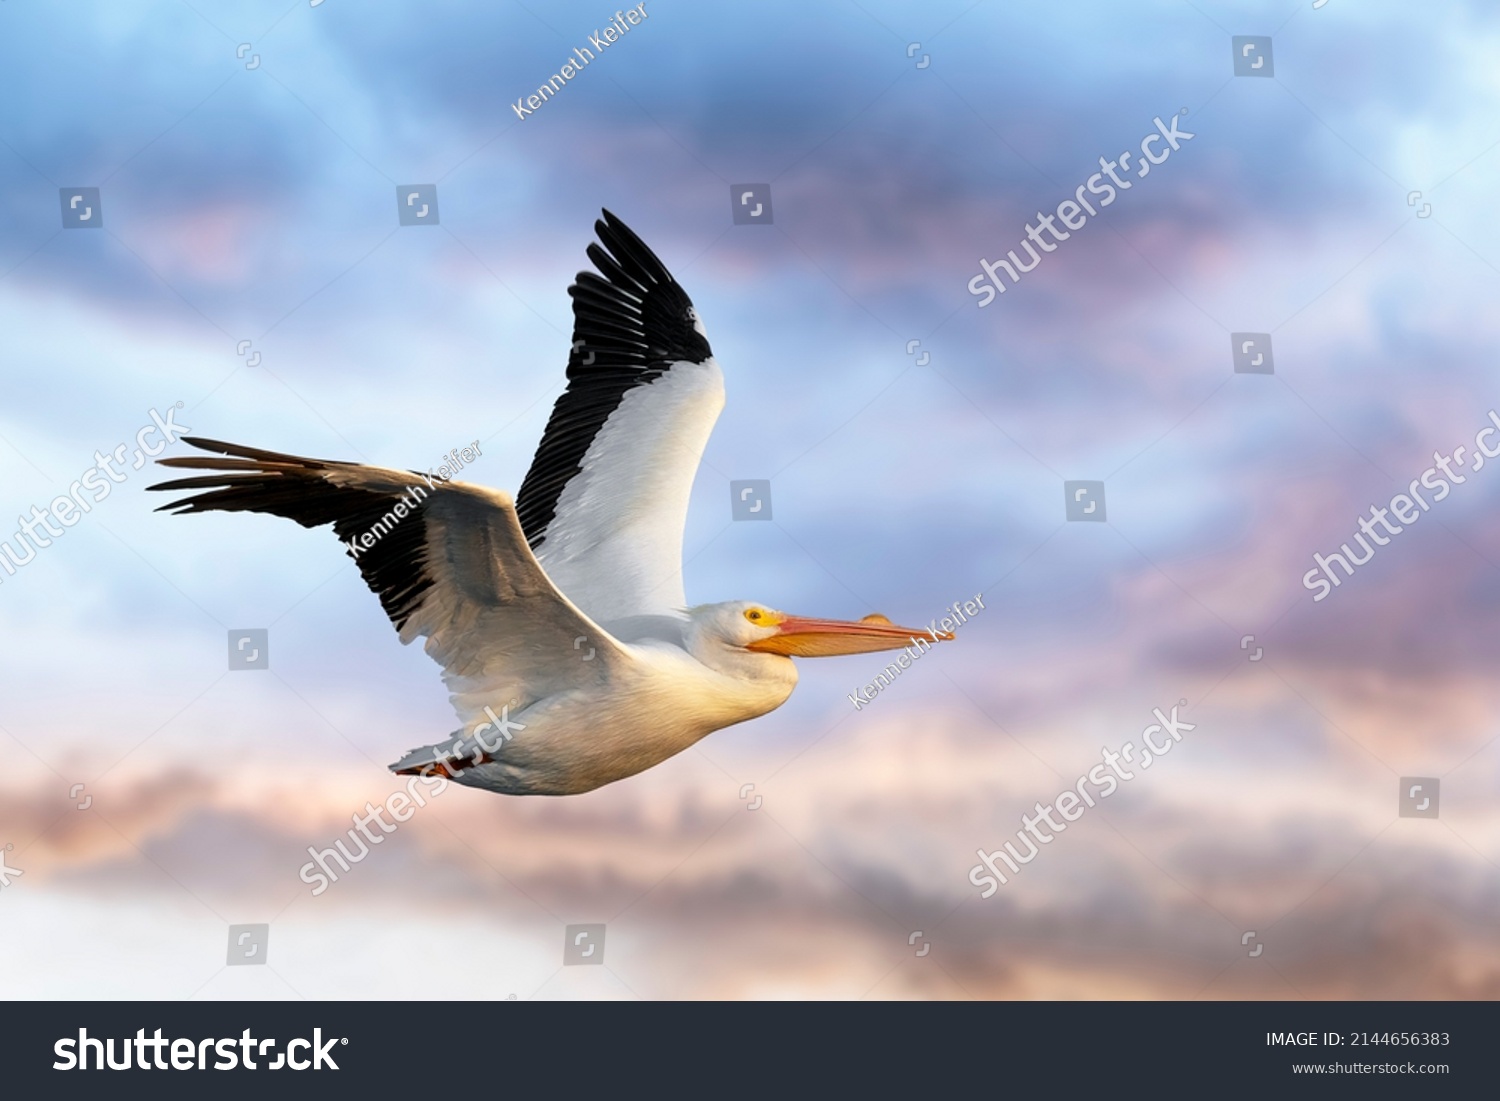 In the colorful early morning sky, an American white pelican bird soars above Ding Darling National Wildlife Refuge on Sanibel Island, Florida. #2144656383